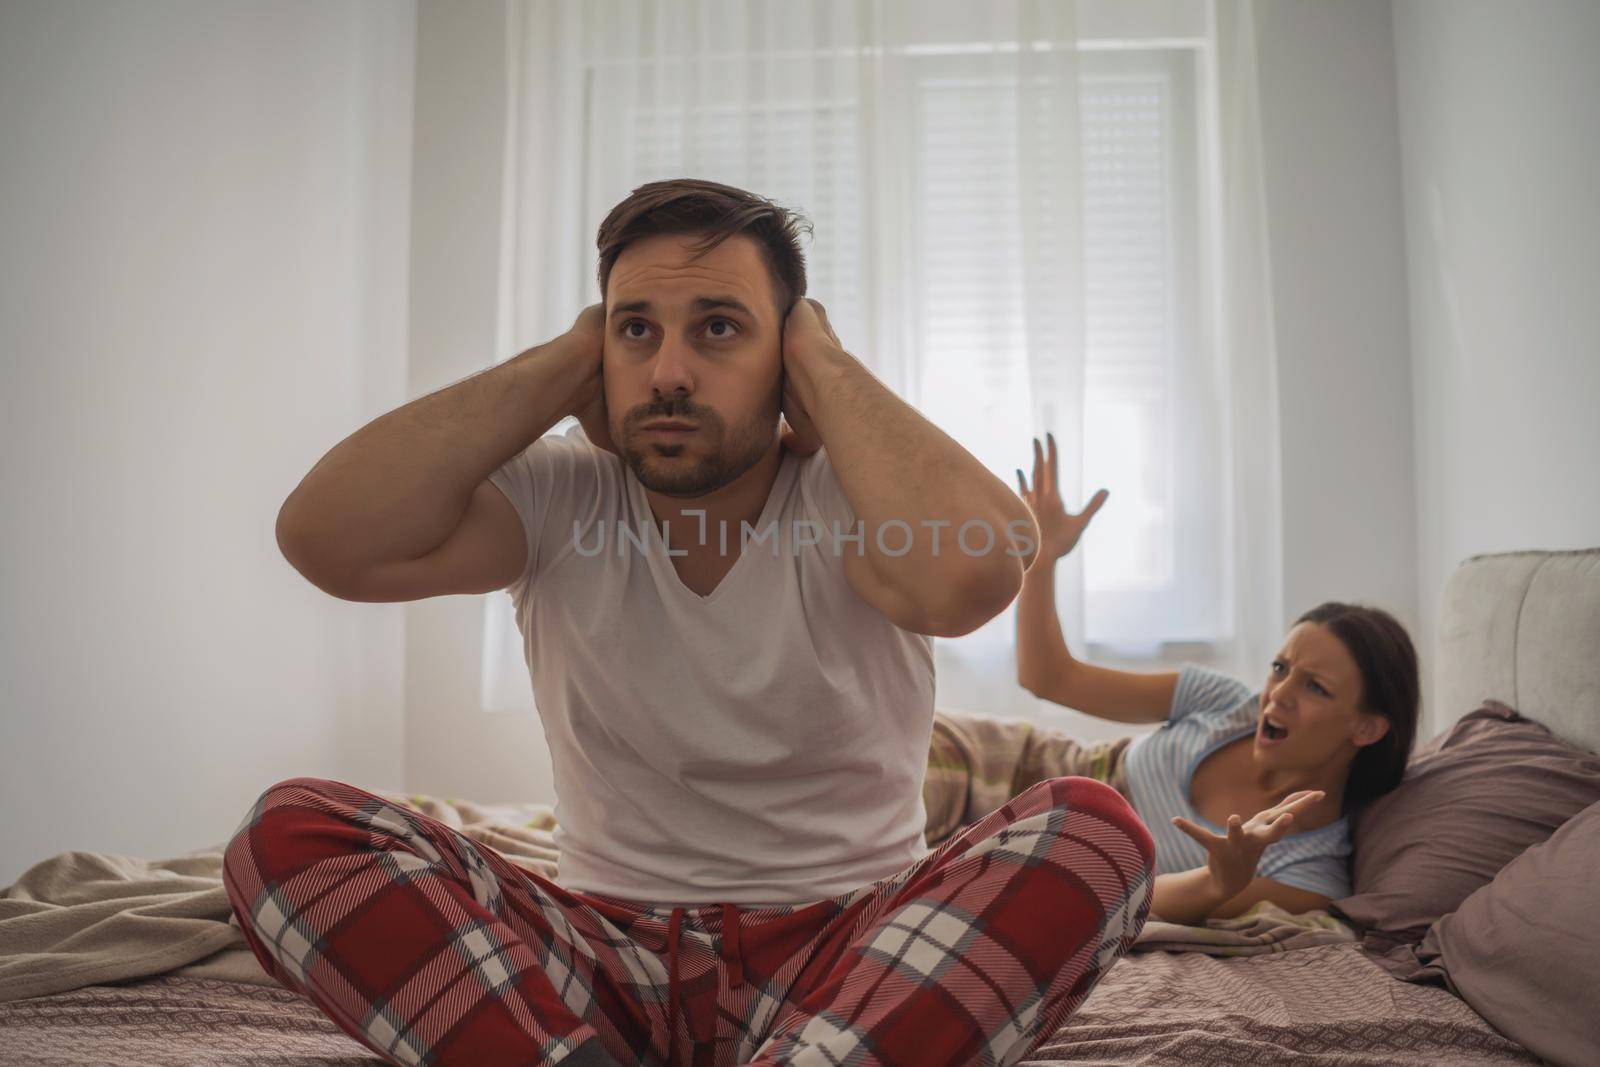 Woman is angry because her man is waking her up.